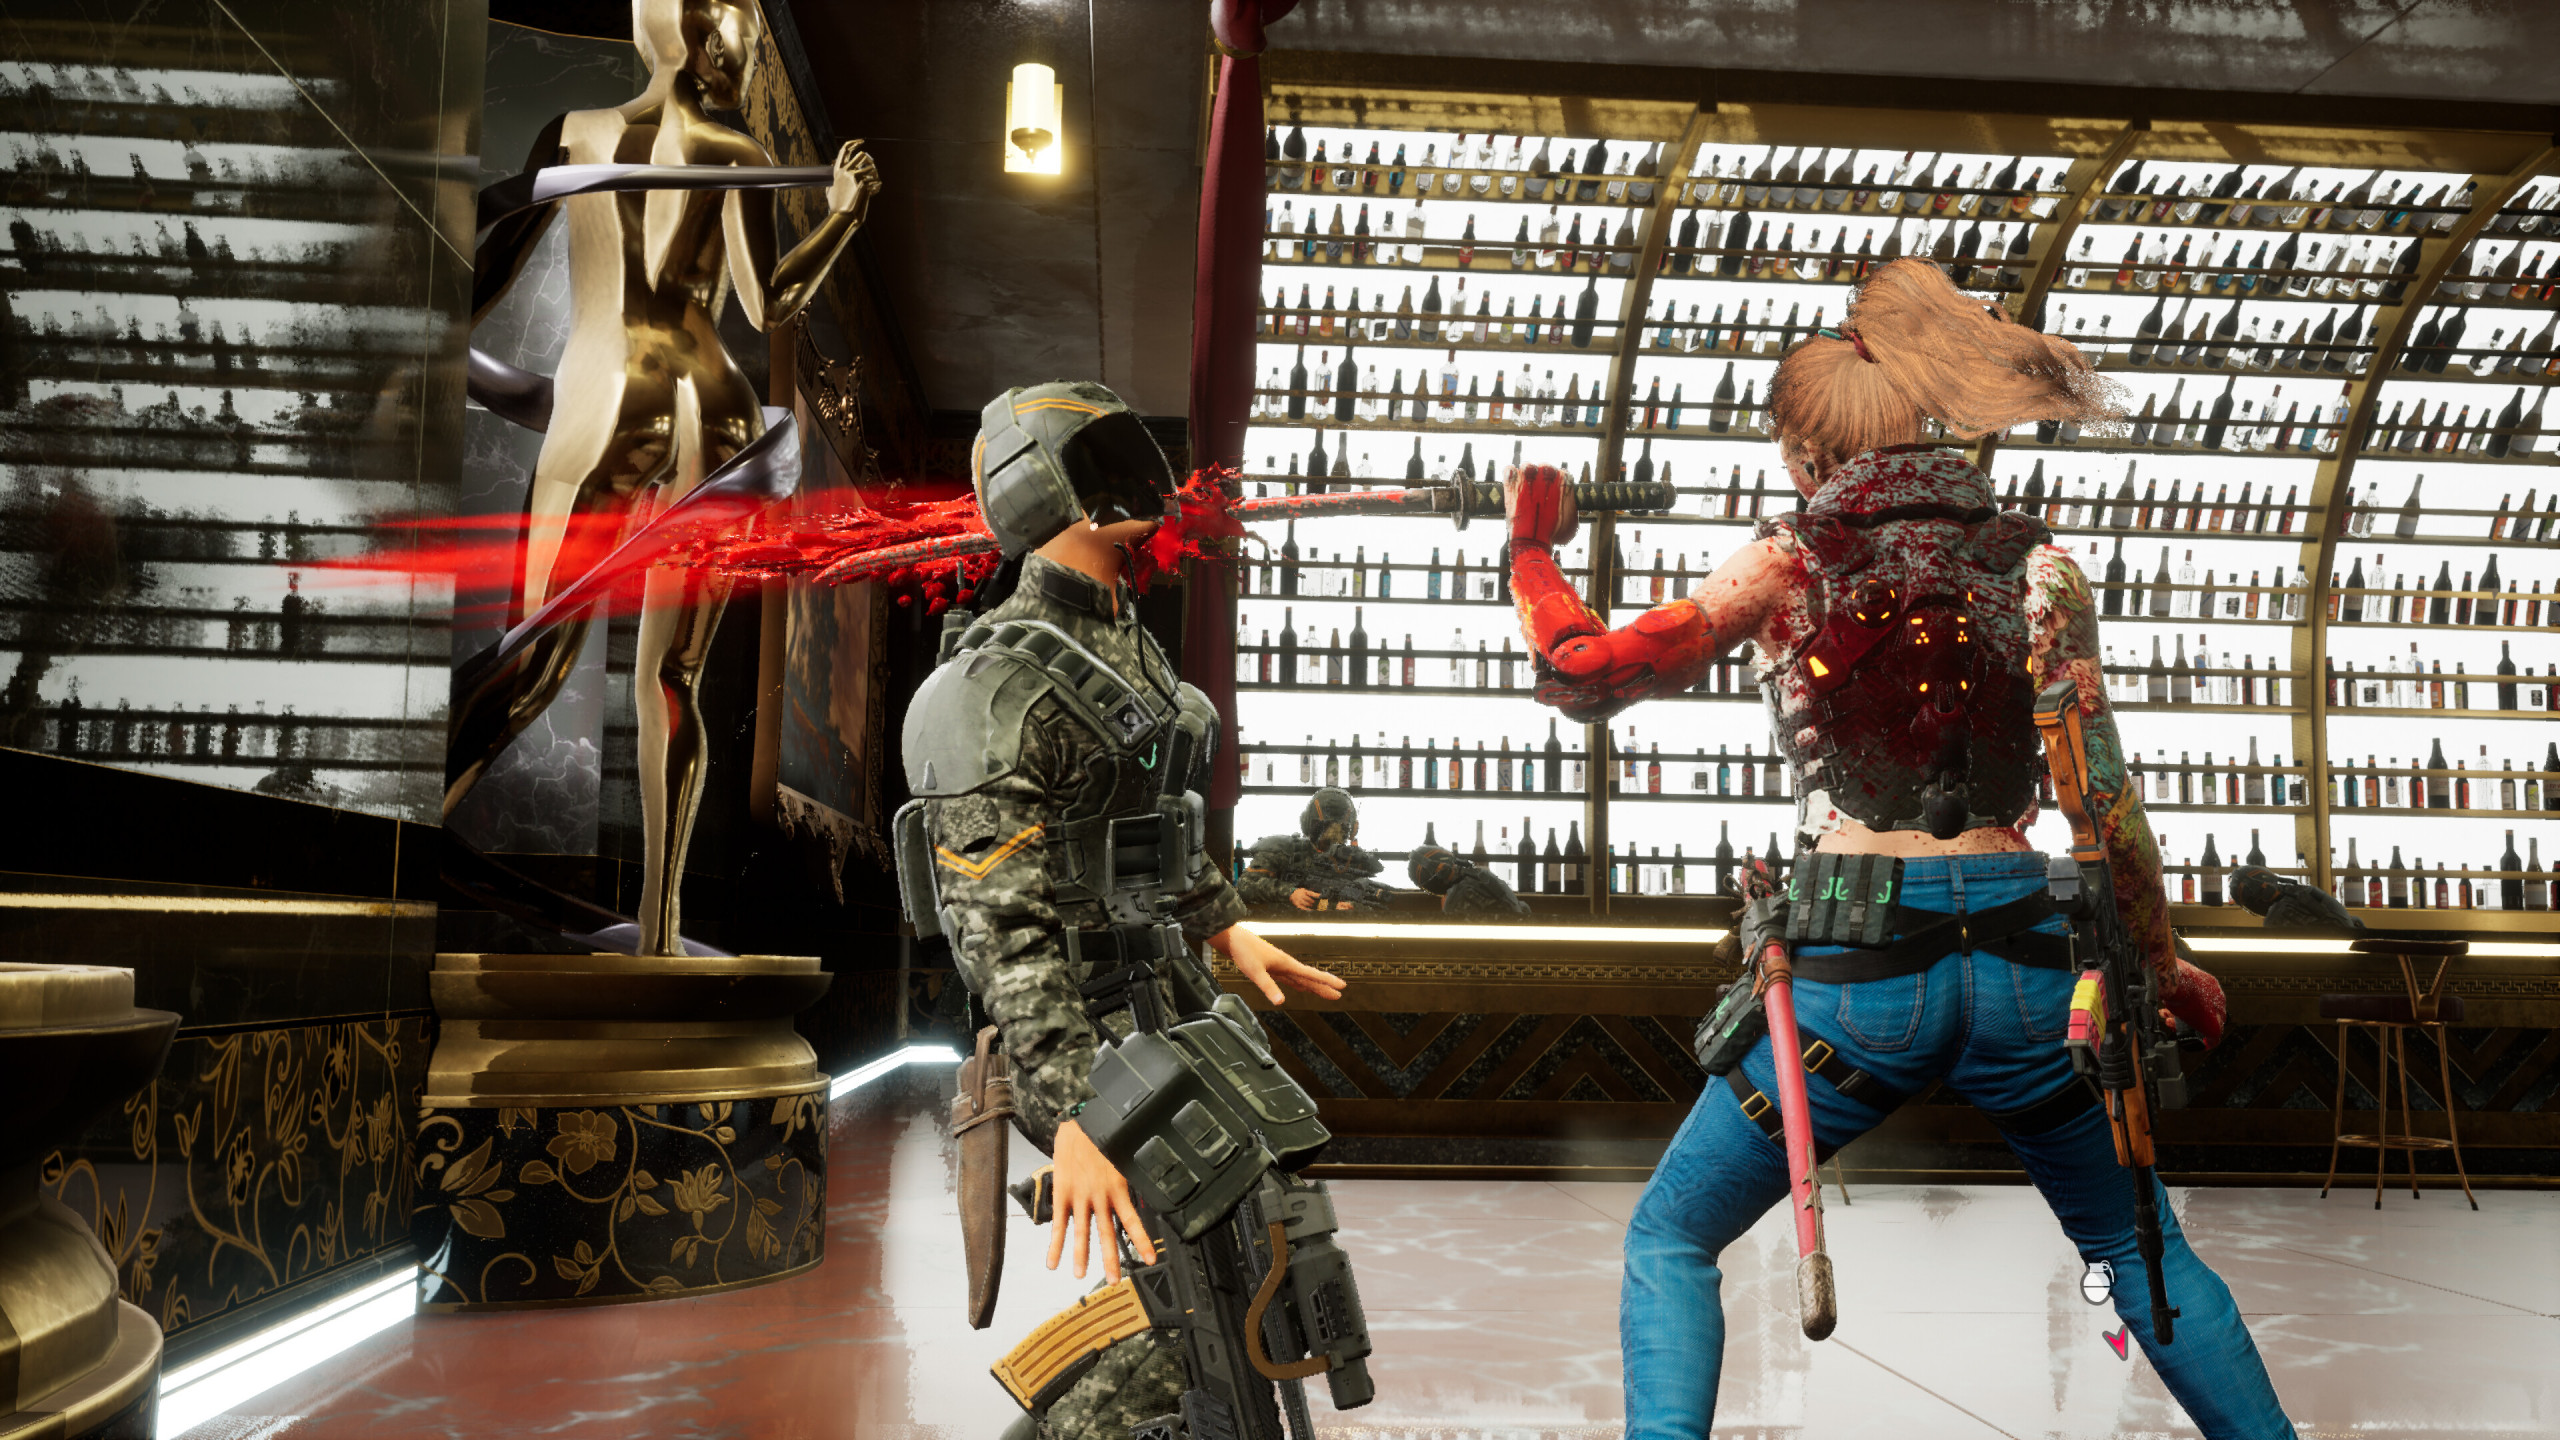 Stone Performing an finisher execution on a stunned enemy. Her Katana piercing the front of the enemy's head with a fountain of blood spraying from the back of their head.